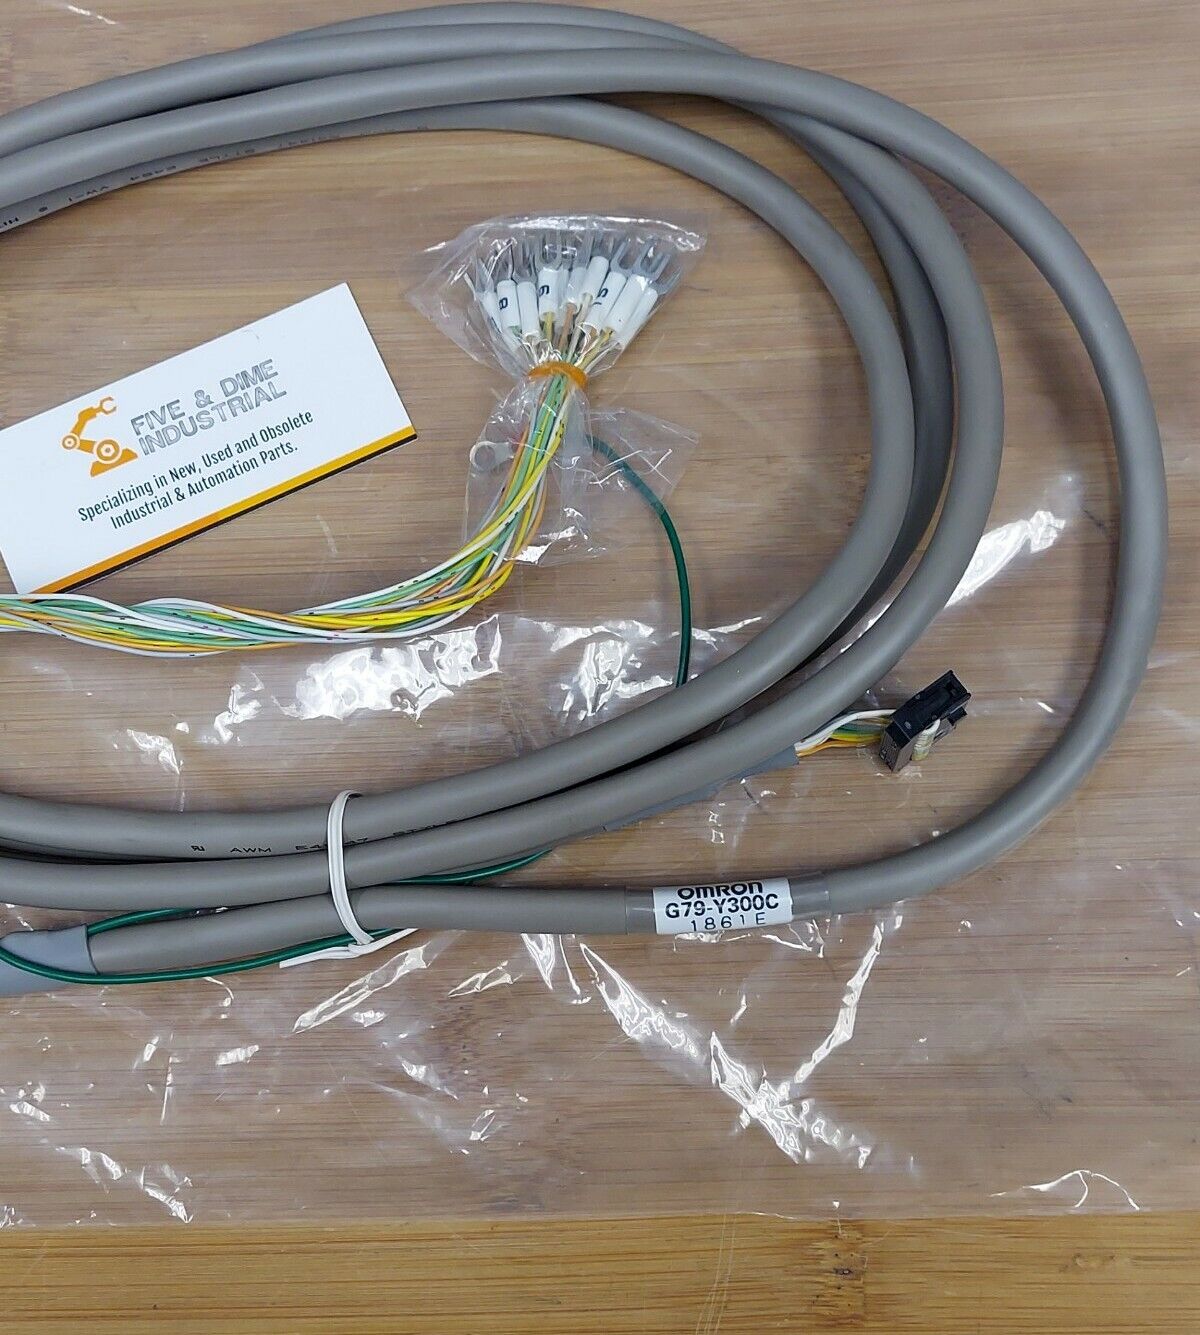 OMRON G79-Y300C 7 New Segment Connecting Cable / Cordset (CBL101) - 0